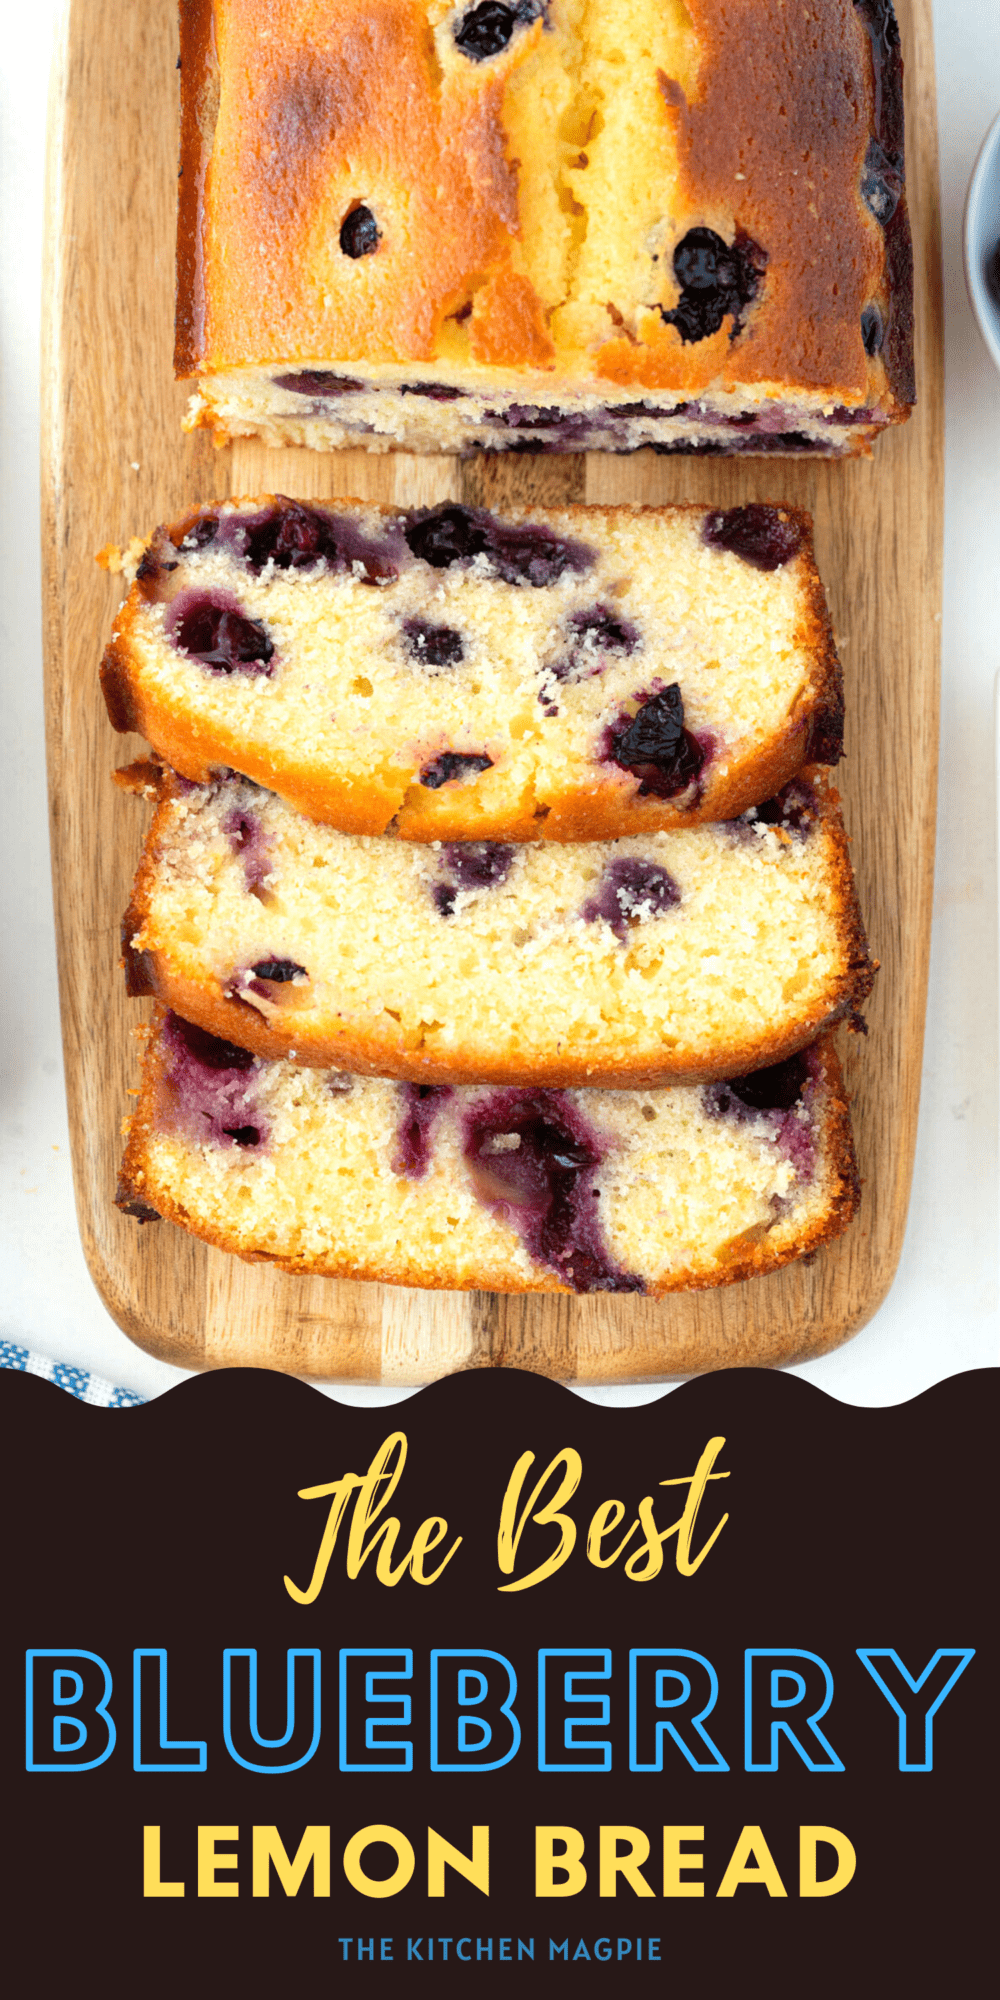 Lemon blueberry bread packed with lemon flavor and blueberries, with a buttery lemon glaze poured over top while the bread is still hot.  Literally THE BEST.